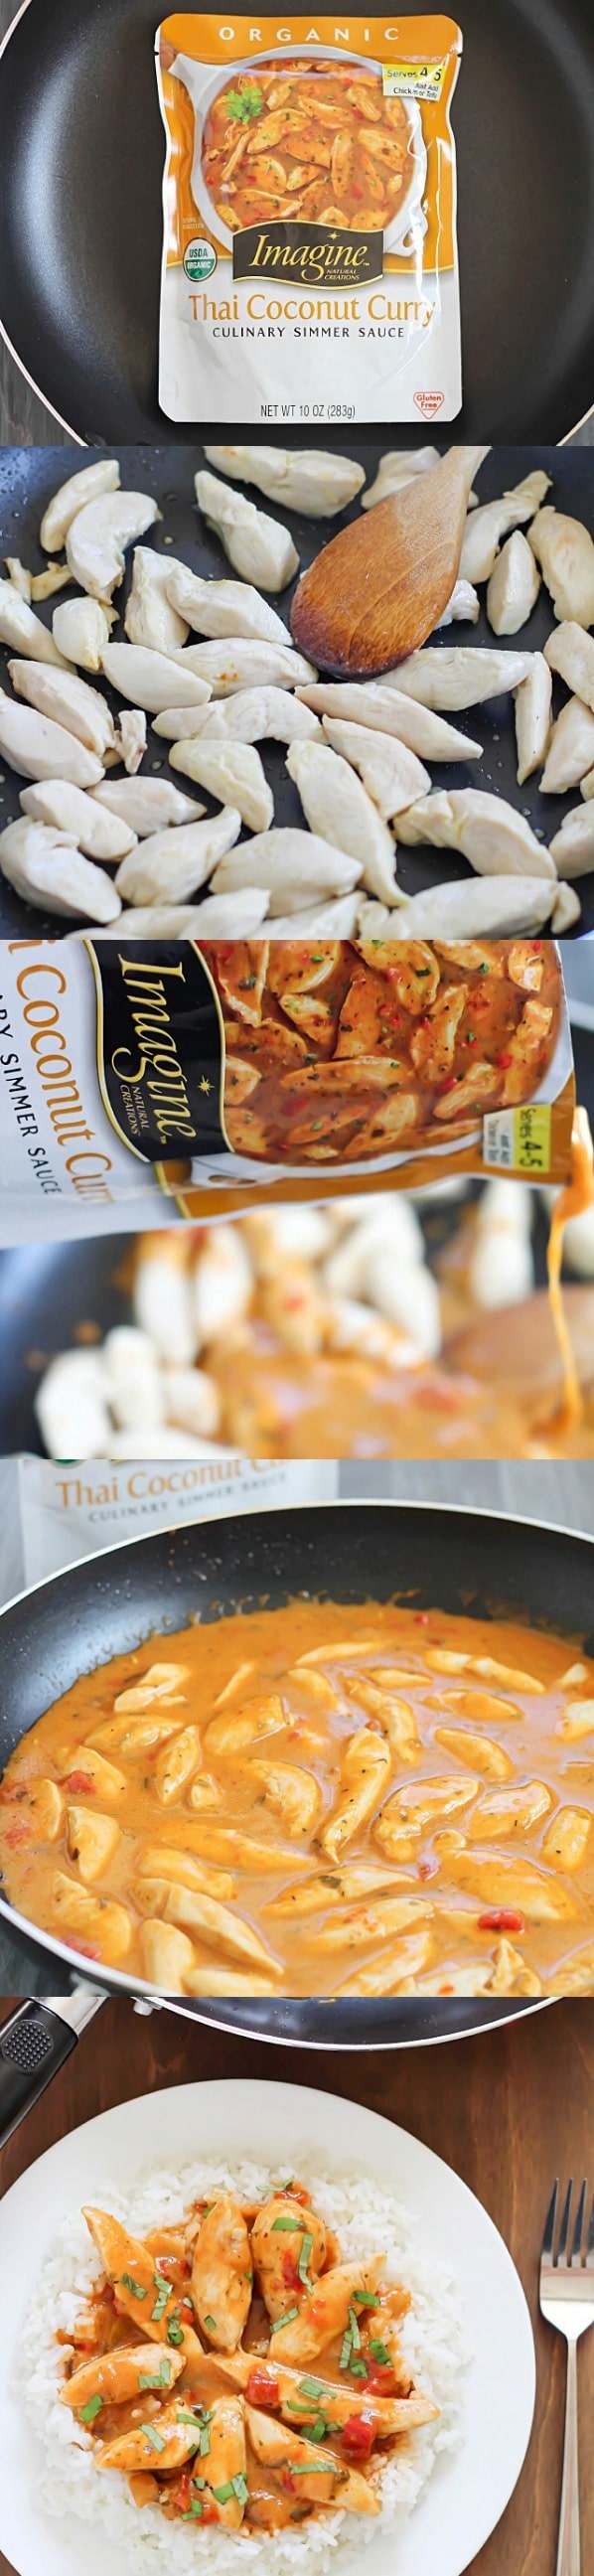 Quick & Easy Thai Coconut Chicken Curry - made in 10 minutes and all in one pan. Doesn't get much easier than that! #panwithaplan #imaginenation